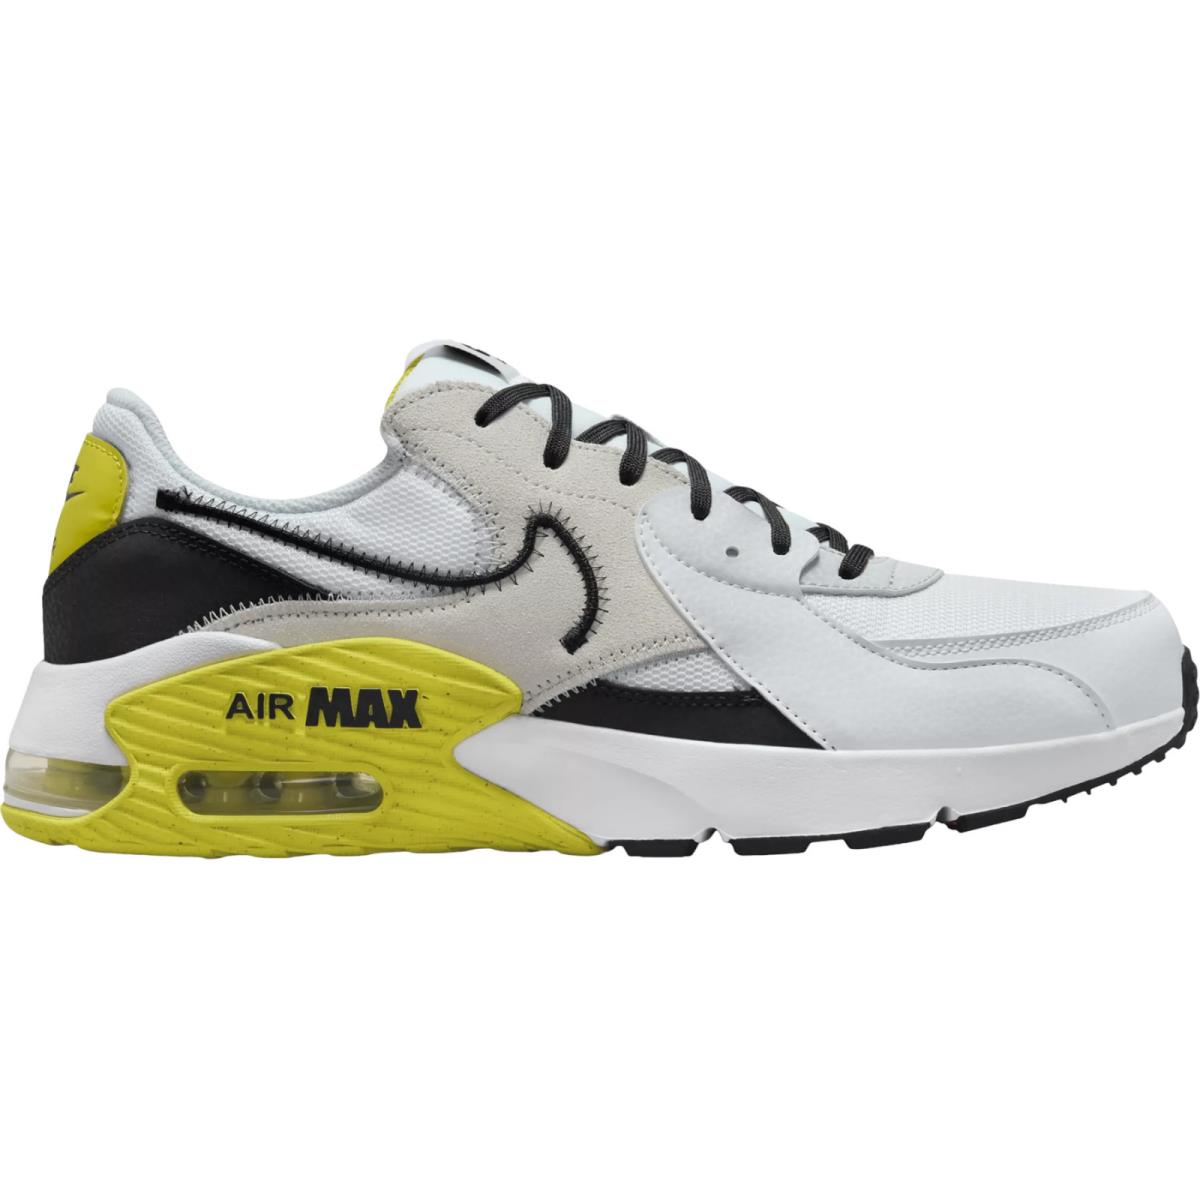 Nike Air Max Excee Men`s Casual Shoes All Colors US Sizes 7-14 White/Bright Cactus/Pure Platinum/Black